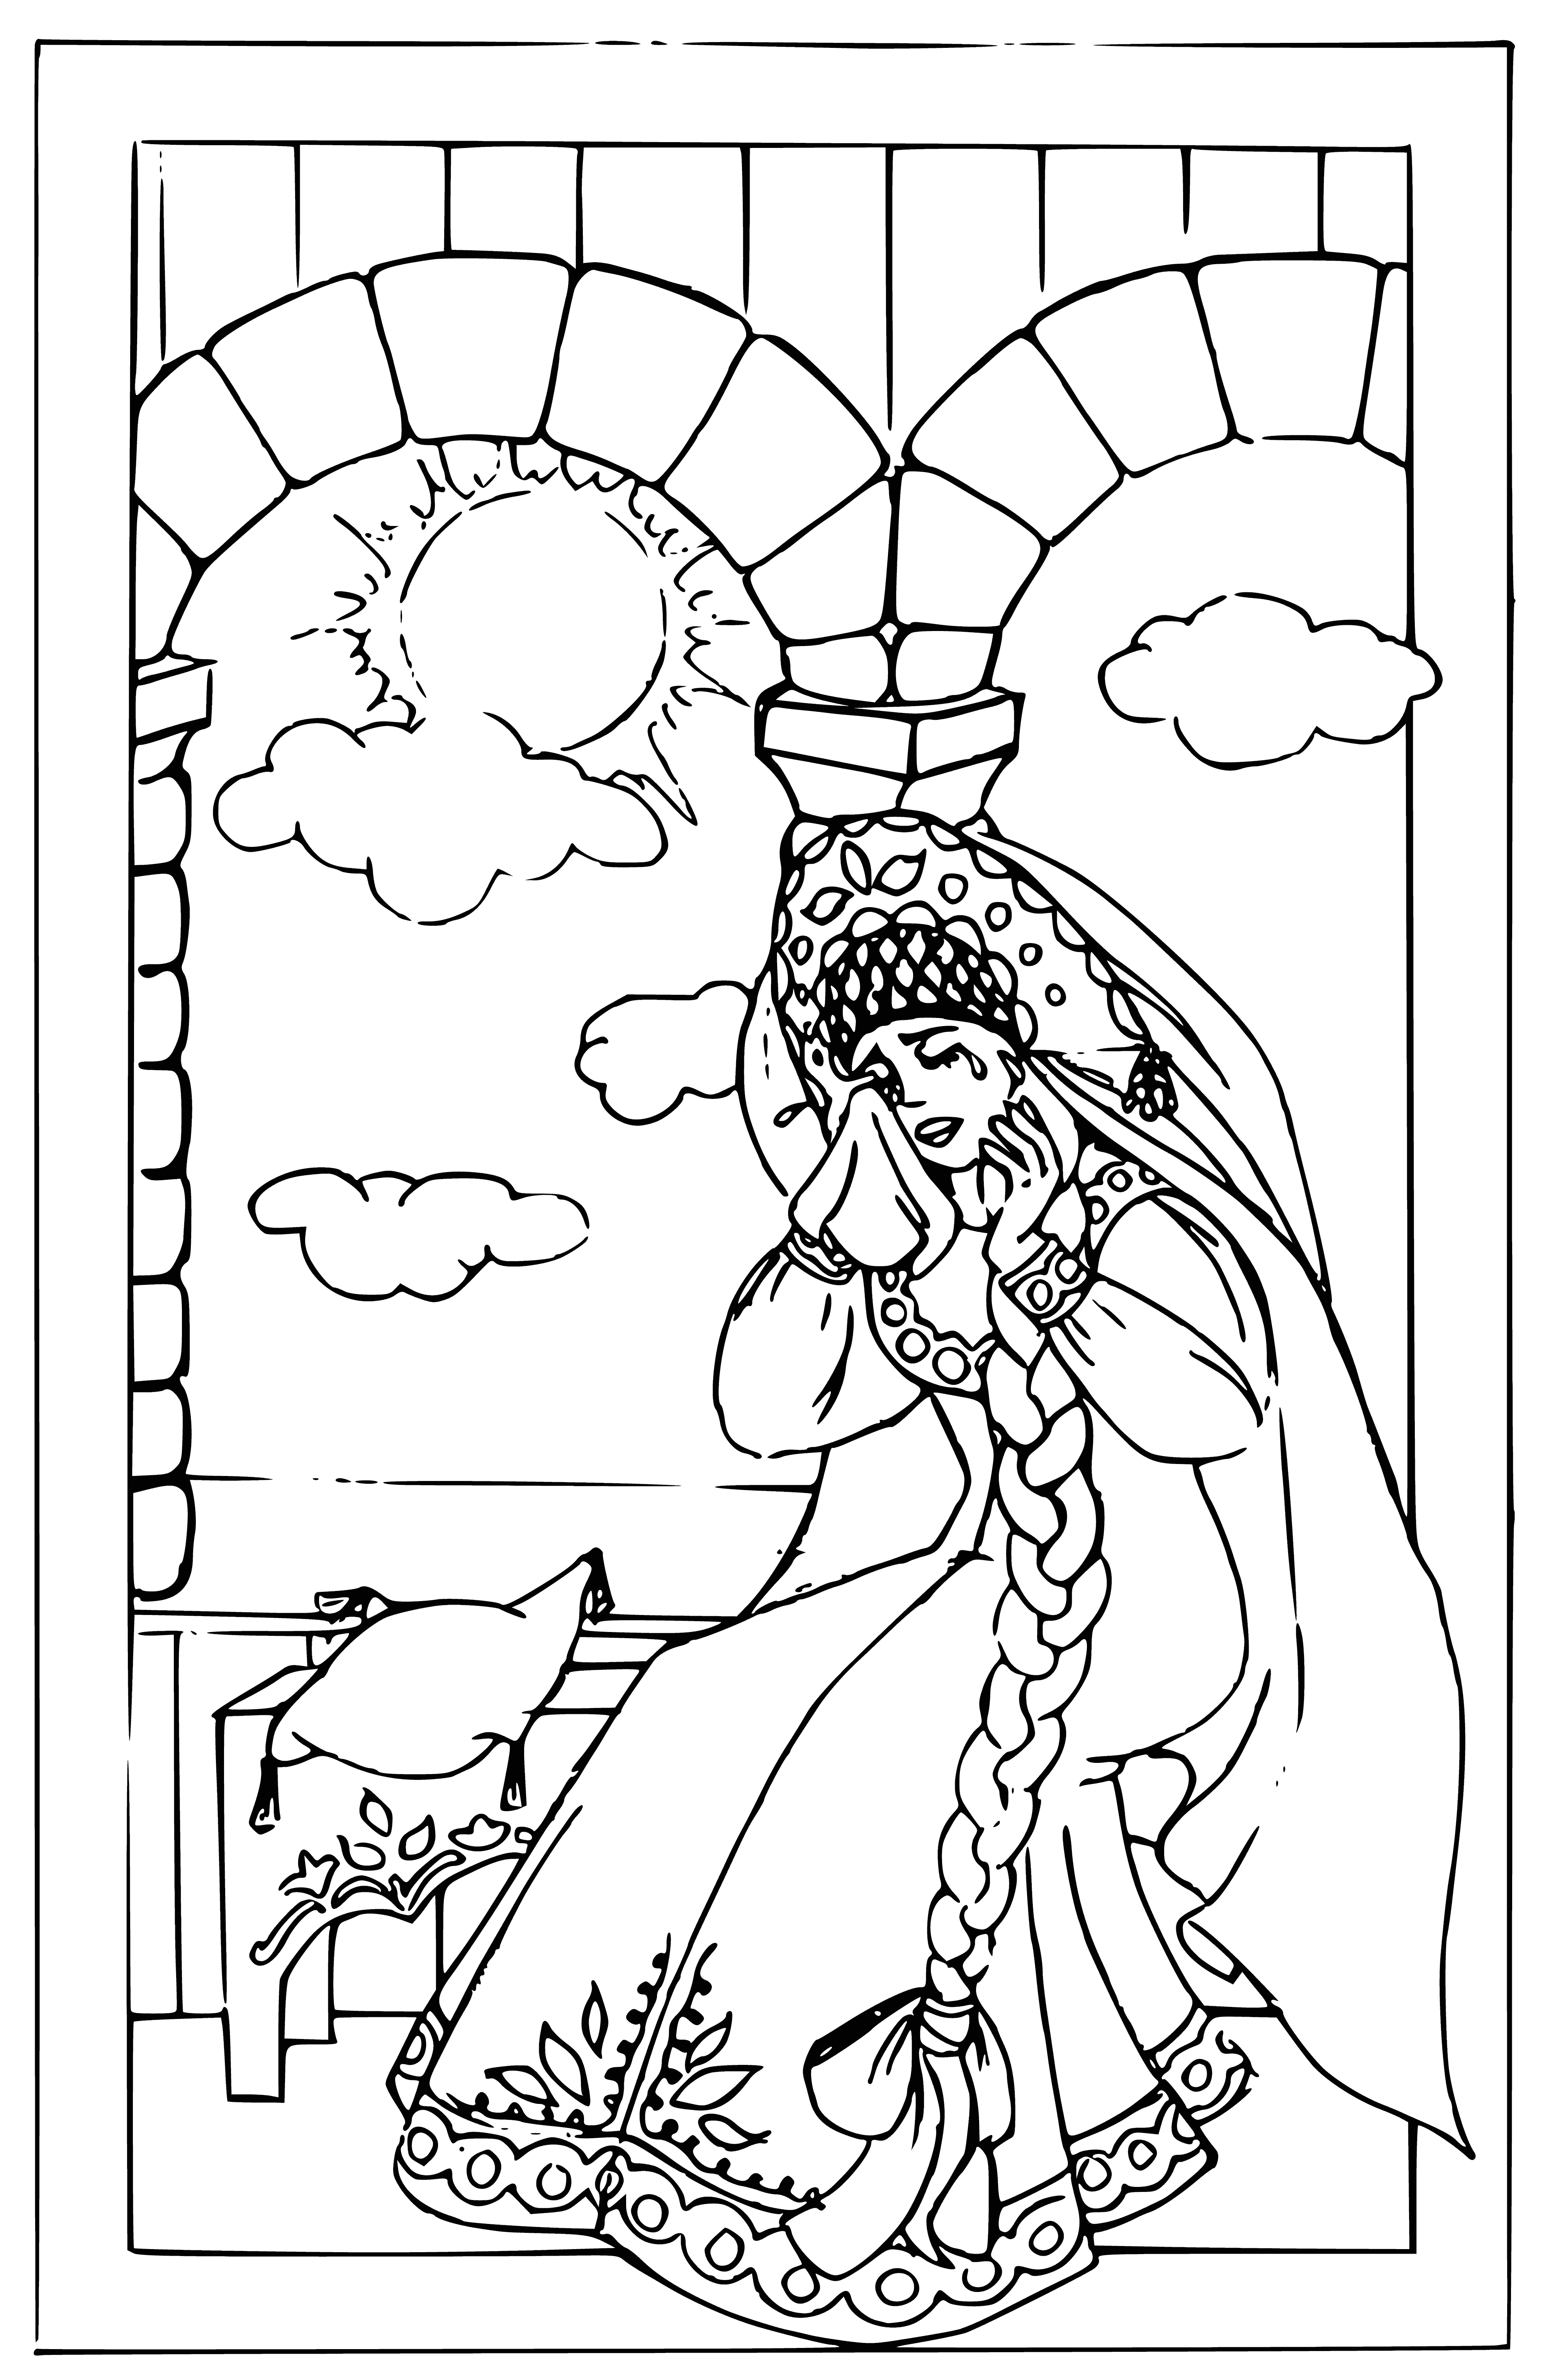 coloring page: Elaborate horse-drawn carriage pulled by four white horses; two men, a woman wearing a fur-trimmed cloak with a gold crown inside; woman appears to be asleep. #carriage #fantasy